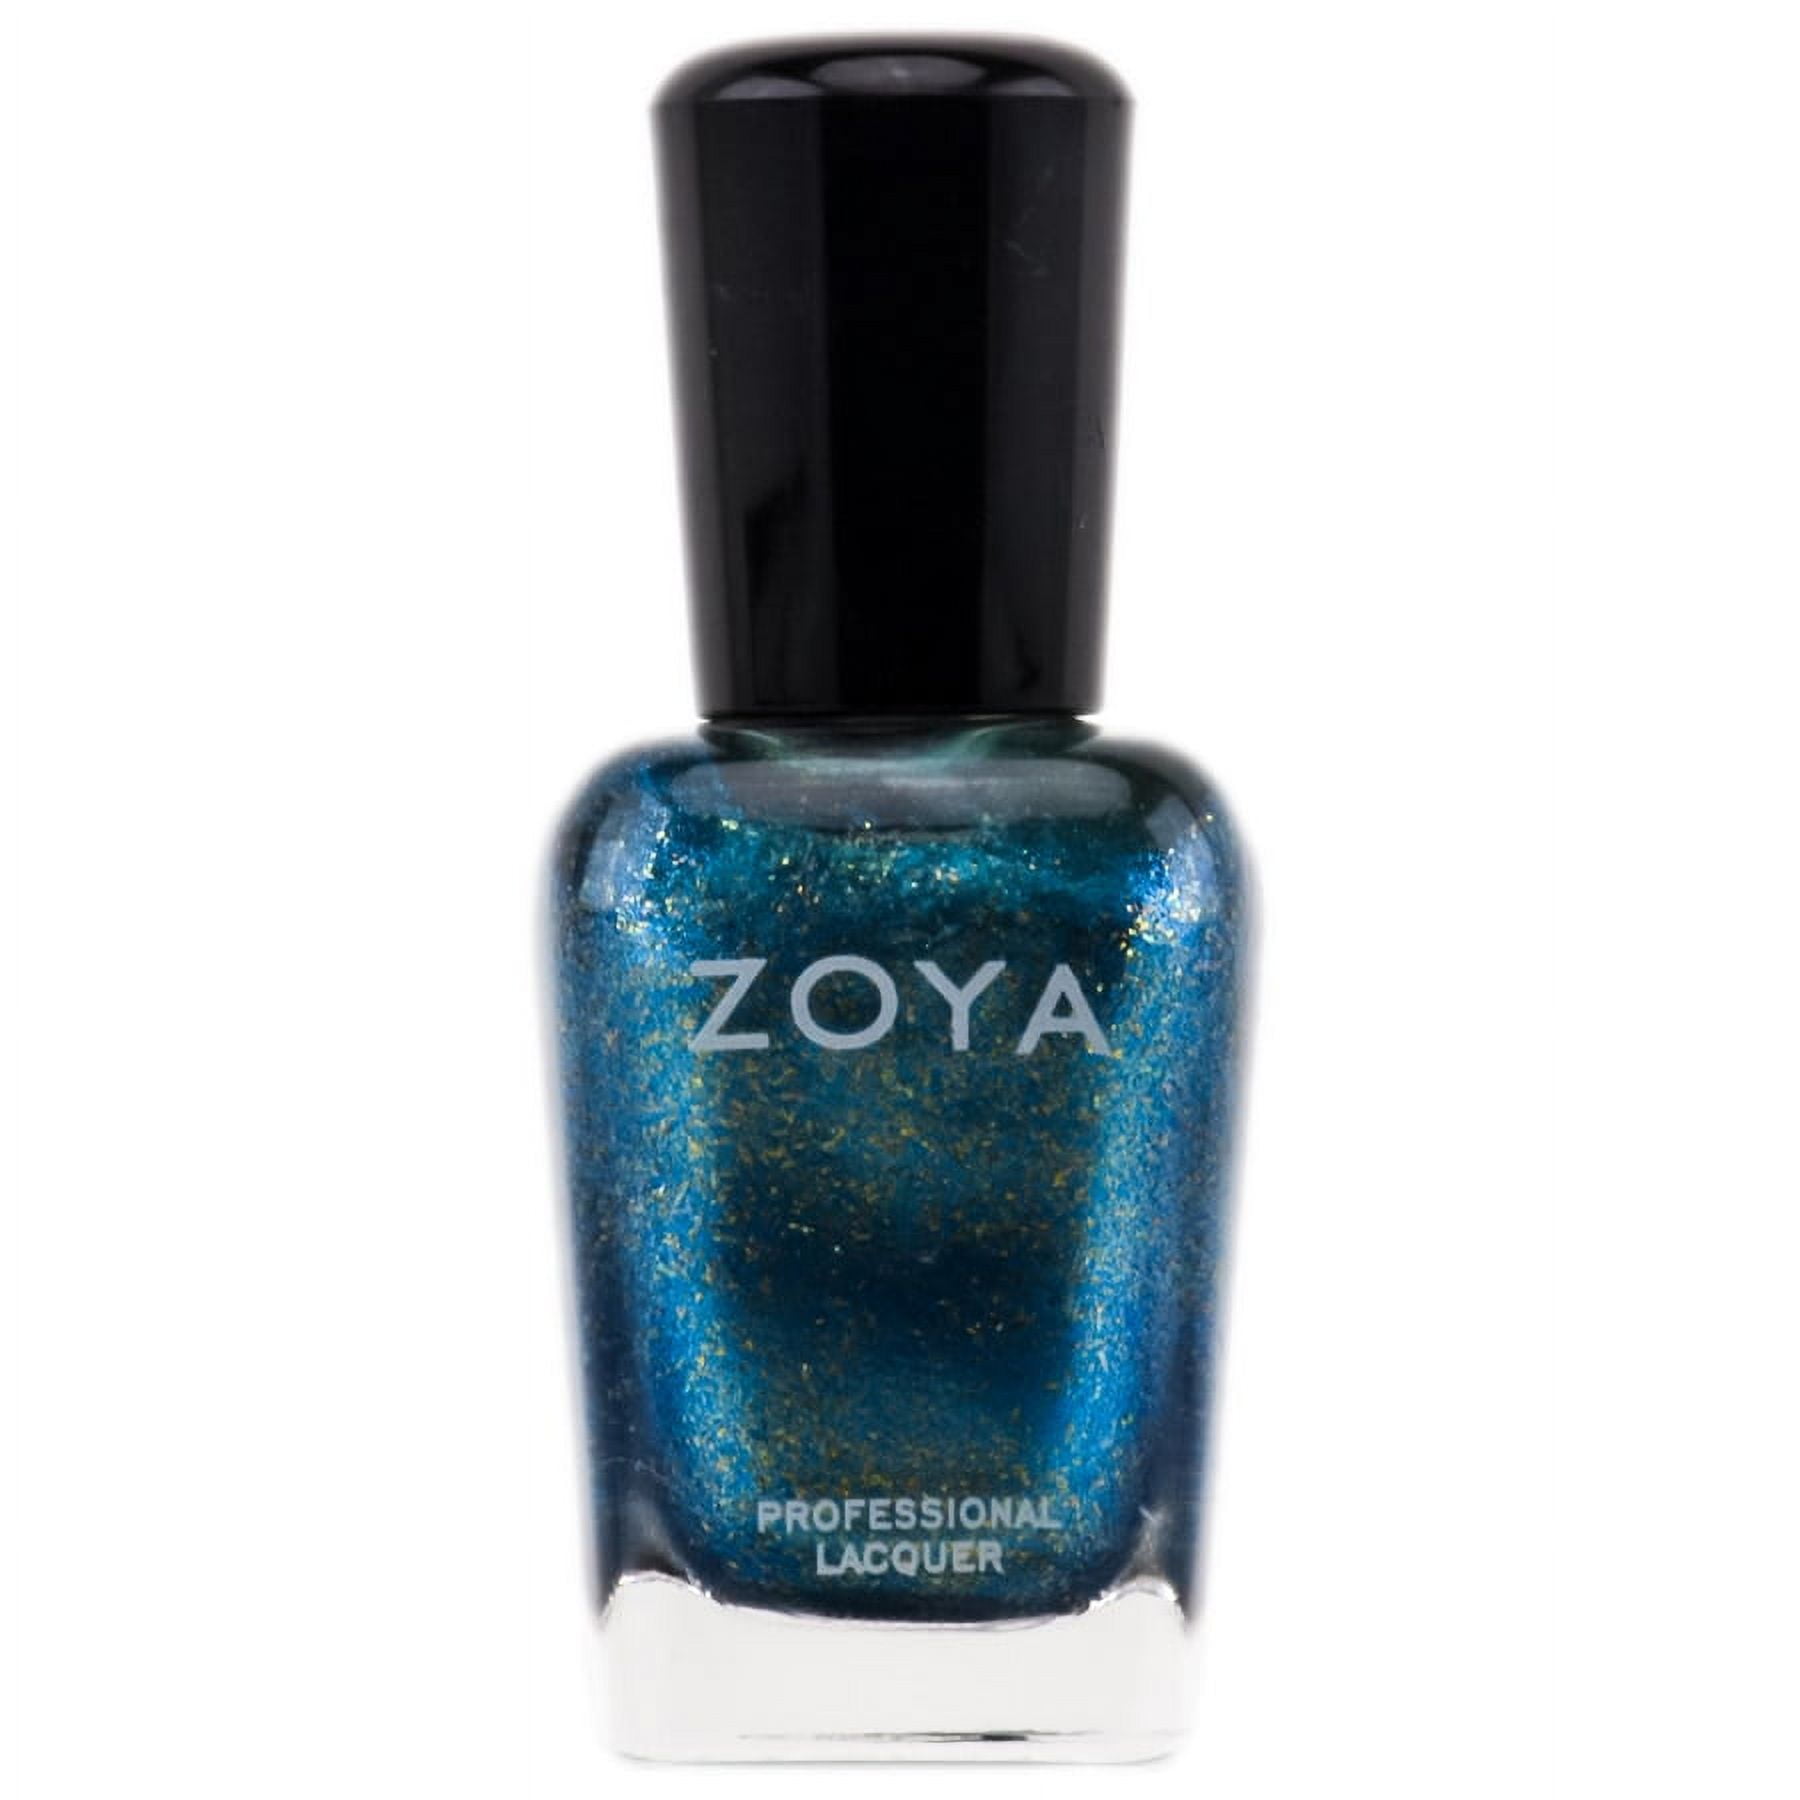 Zoya Nail Polish and Treatments - Inspiration for your 6 colors of choice  to grab with your Mystery Bag! 😊 The Naturel 4 Collection is calming and  perfect for the in-between seasons.